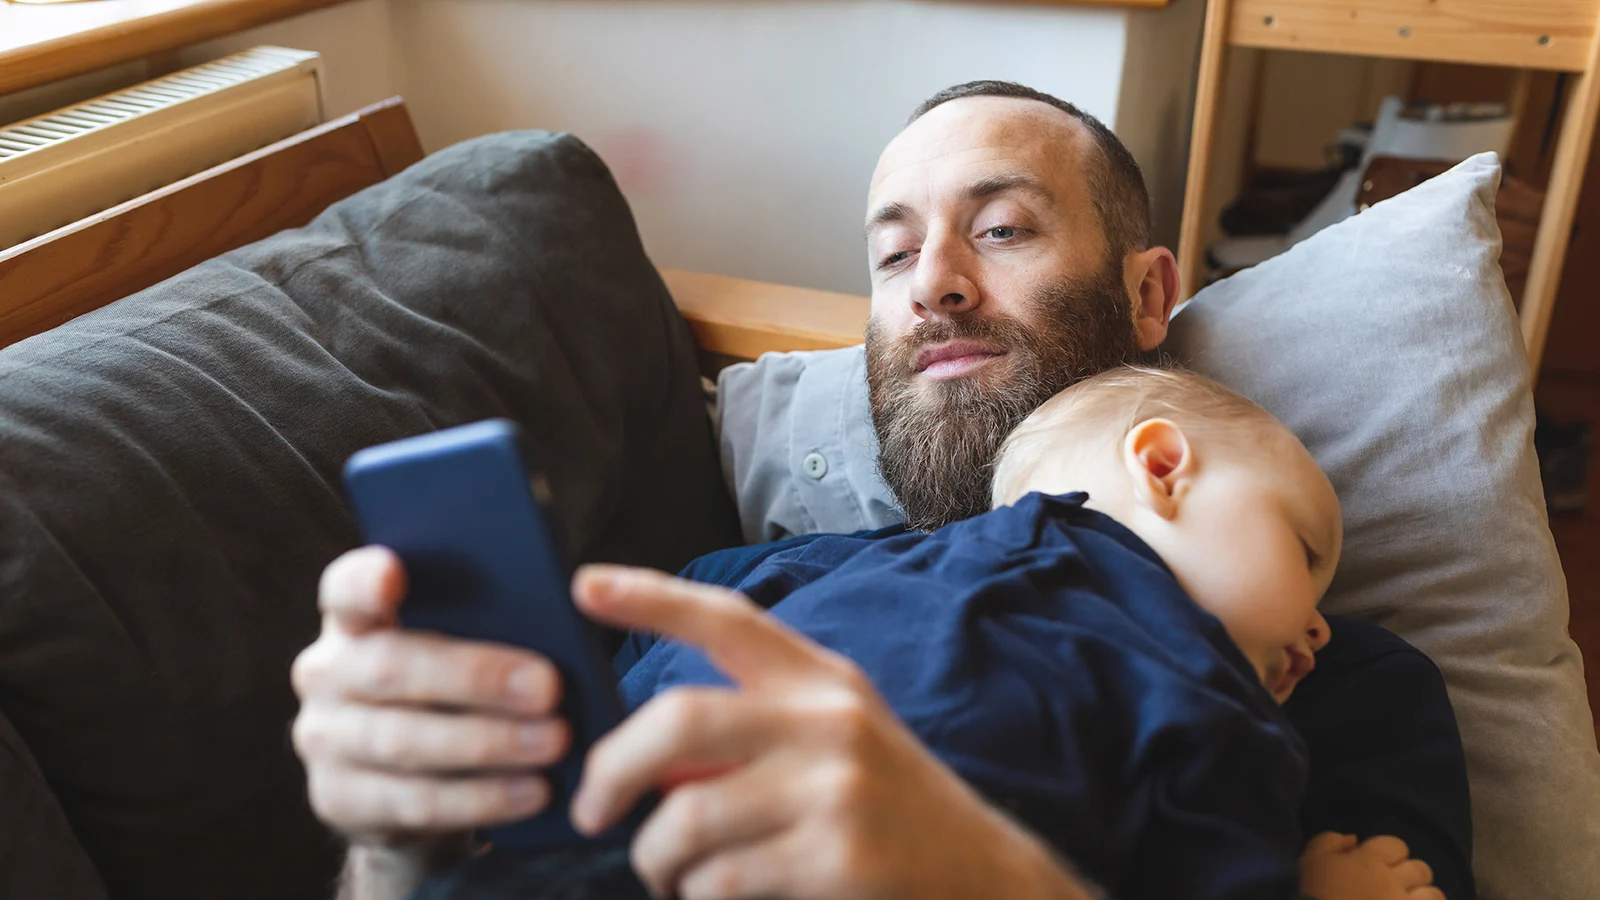 Overview of services - Baby sleeping on top of his father who is looking at his phone